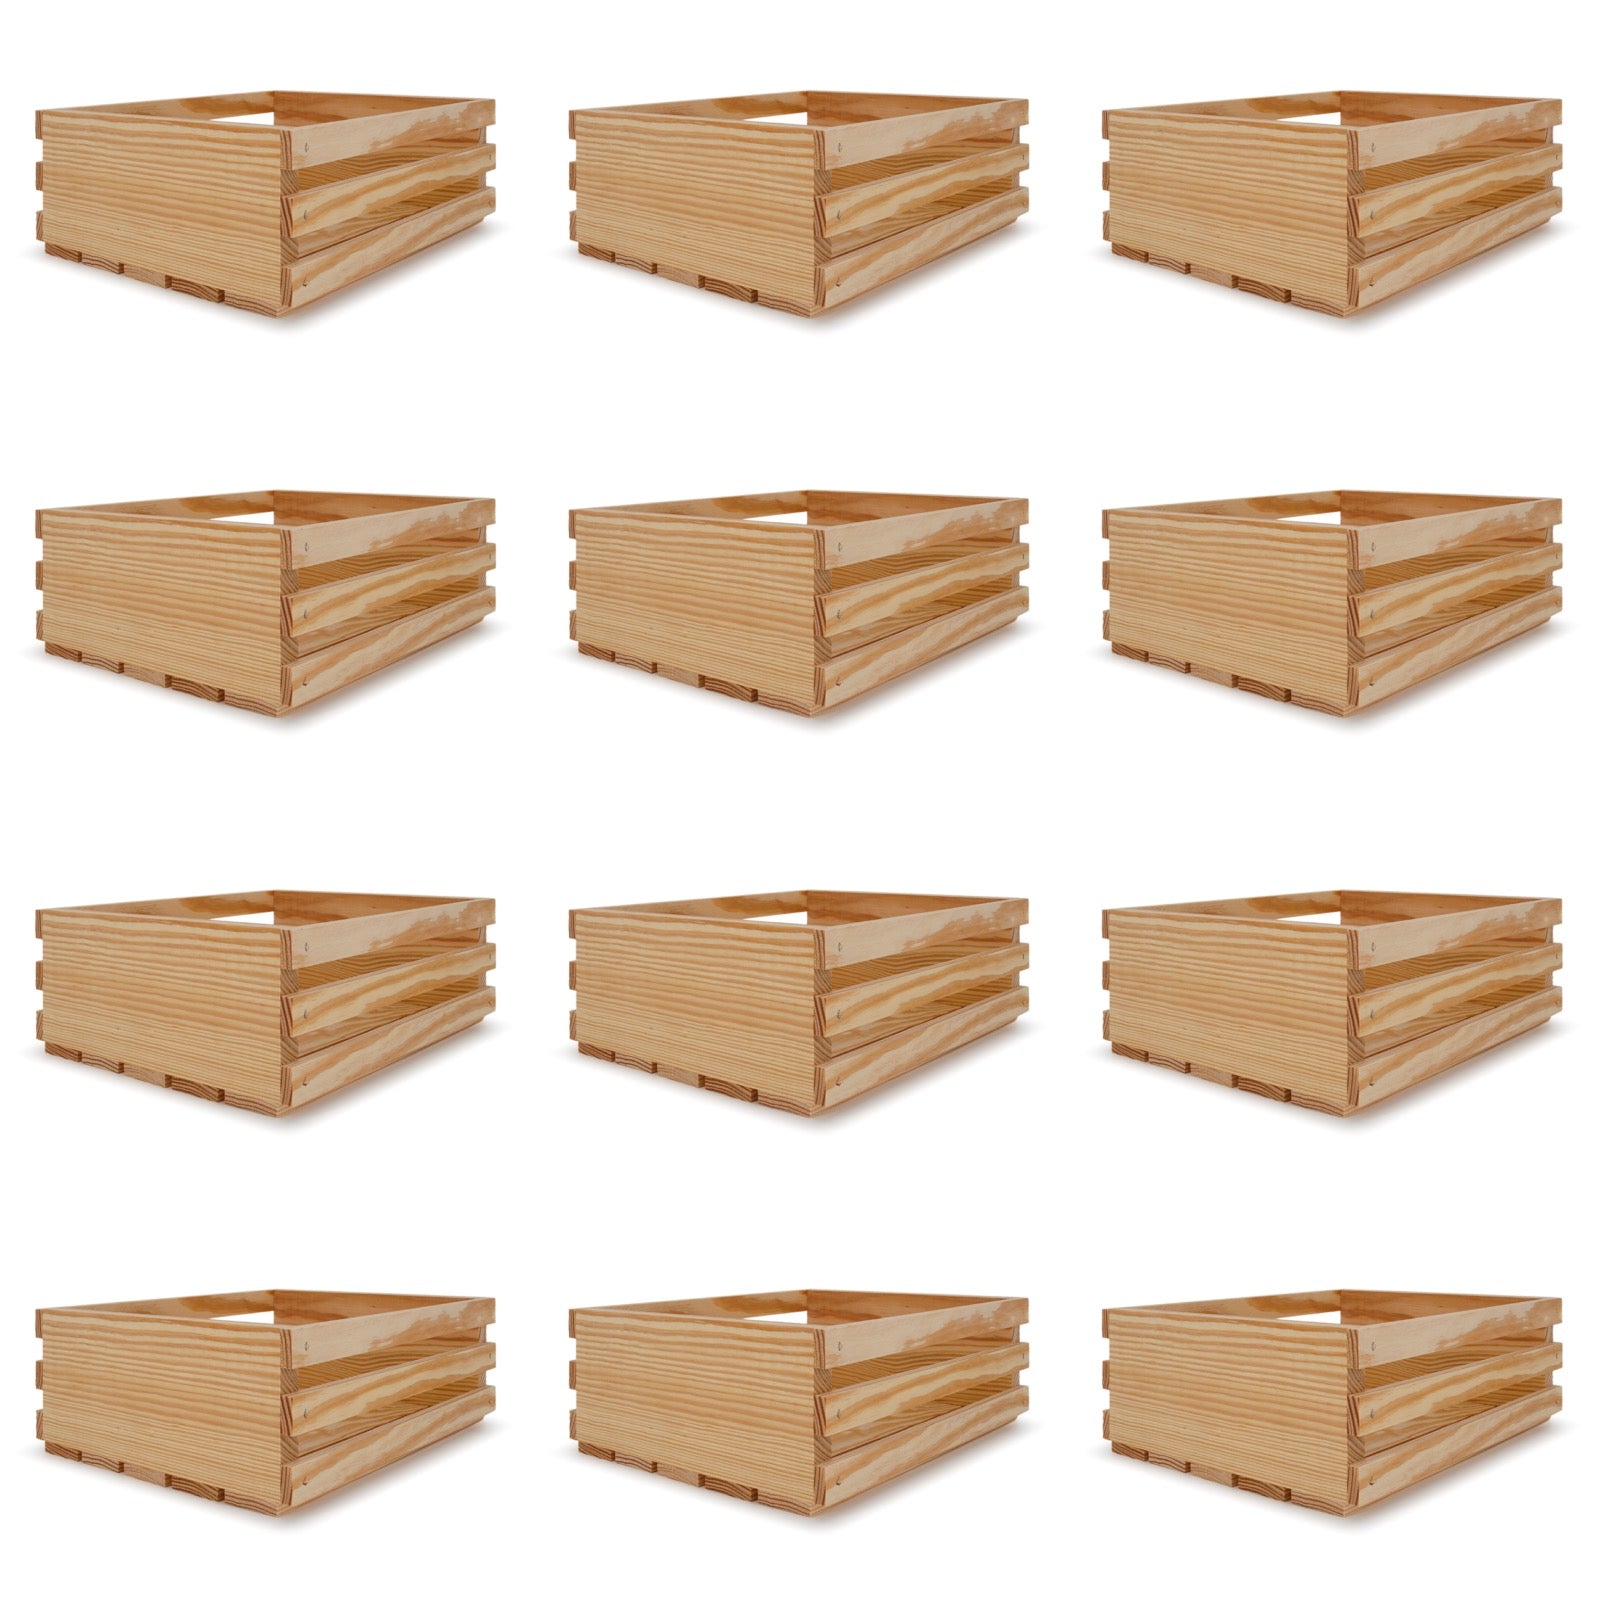 12 Small wooden crates 12x10x4.5